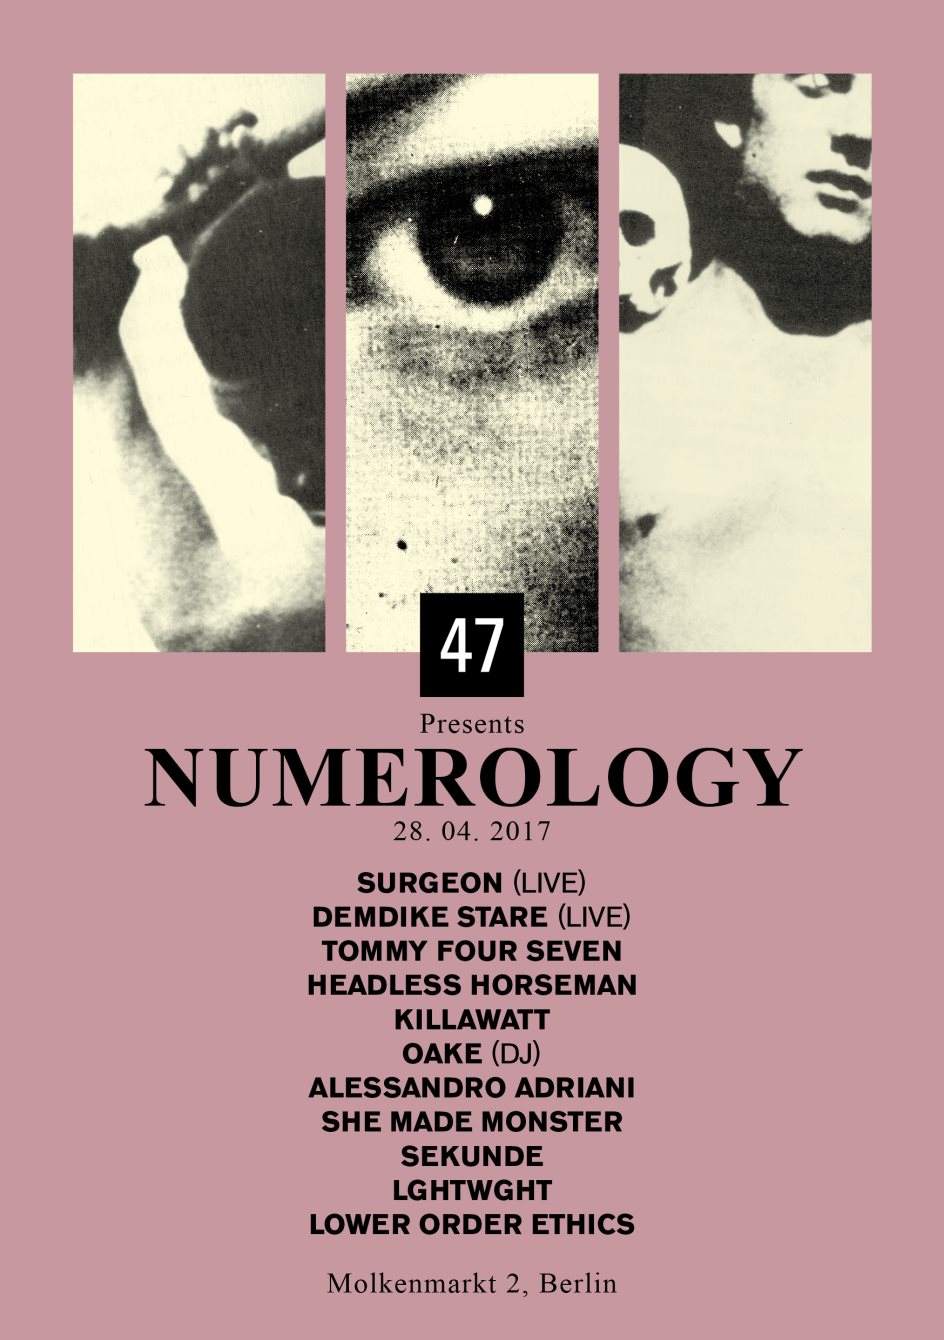 47 presents Numerology with Surgeon, Demdike Stare, Tommy Four Seven, Headless Horseman & More - Página trasera